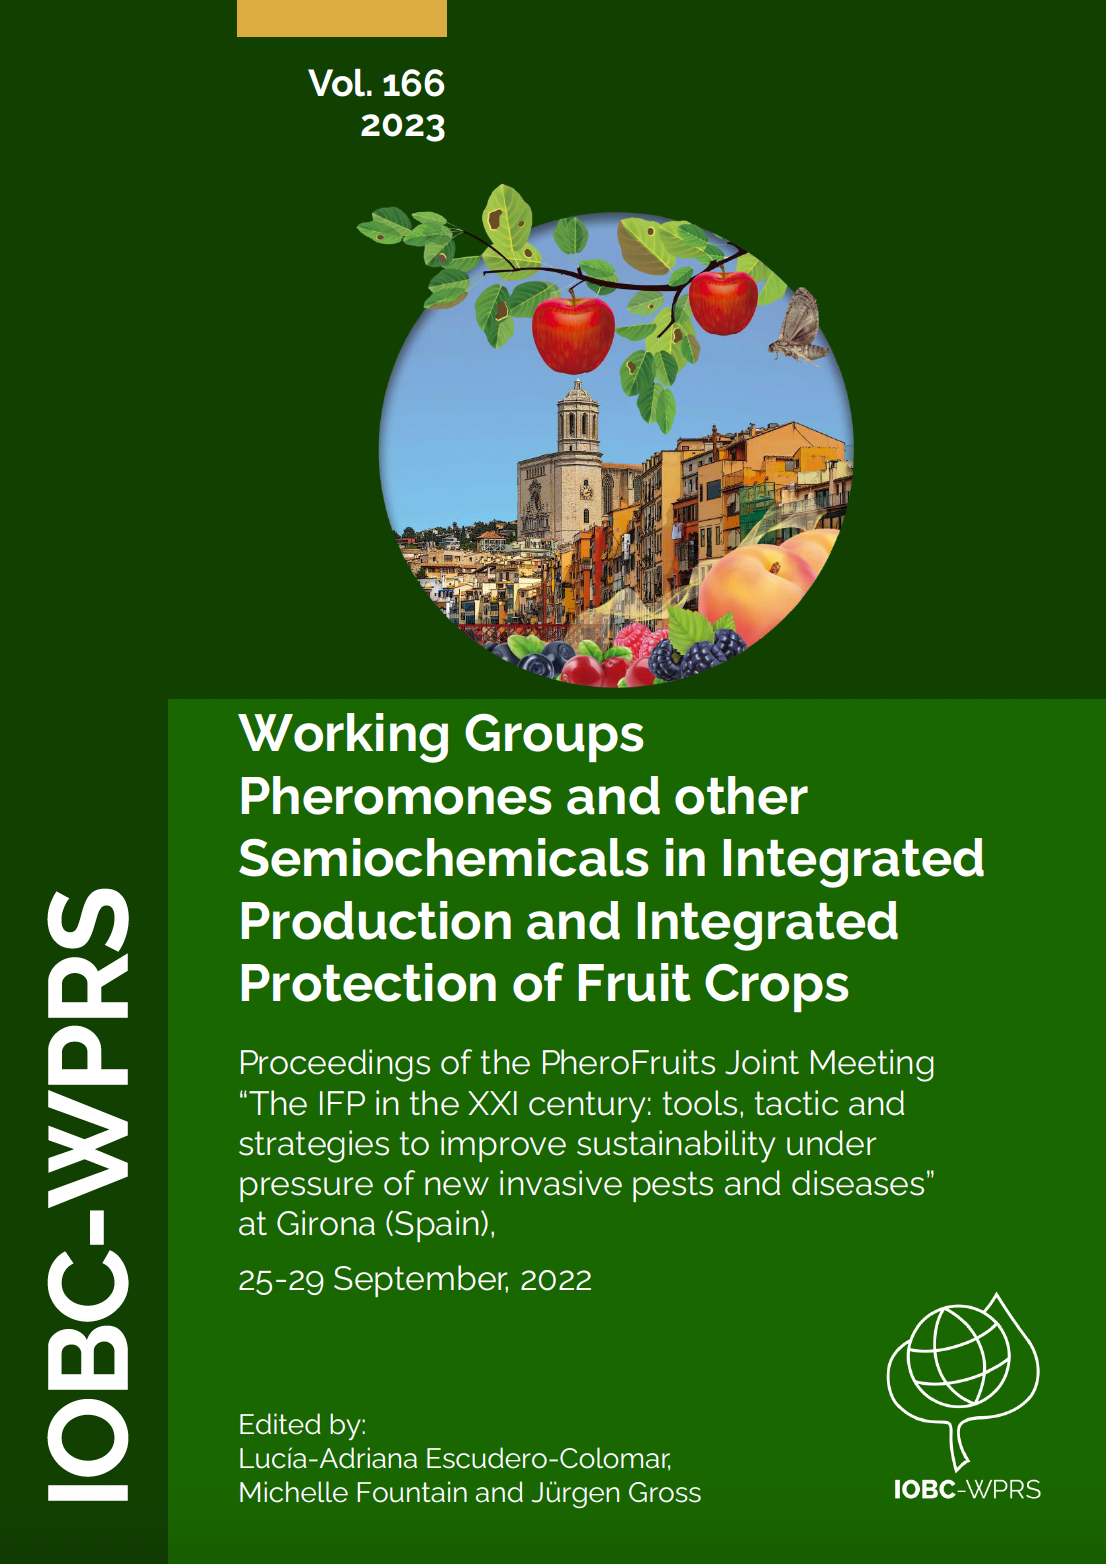 New Bulletin: WGs “Pheromones and other Semiochemicals in Integrated Production” and “Integrated Protection of Fruit Crops”